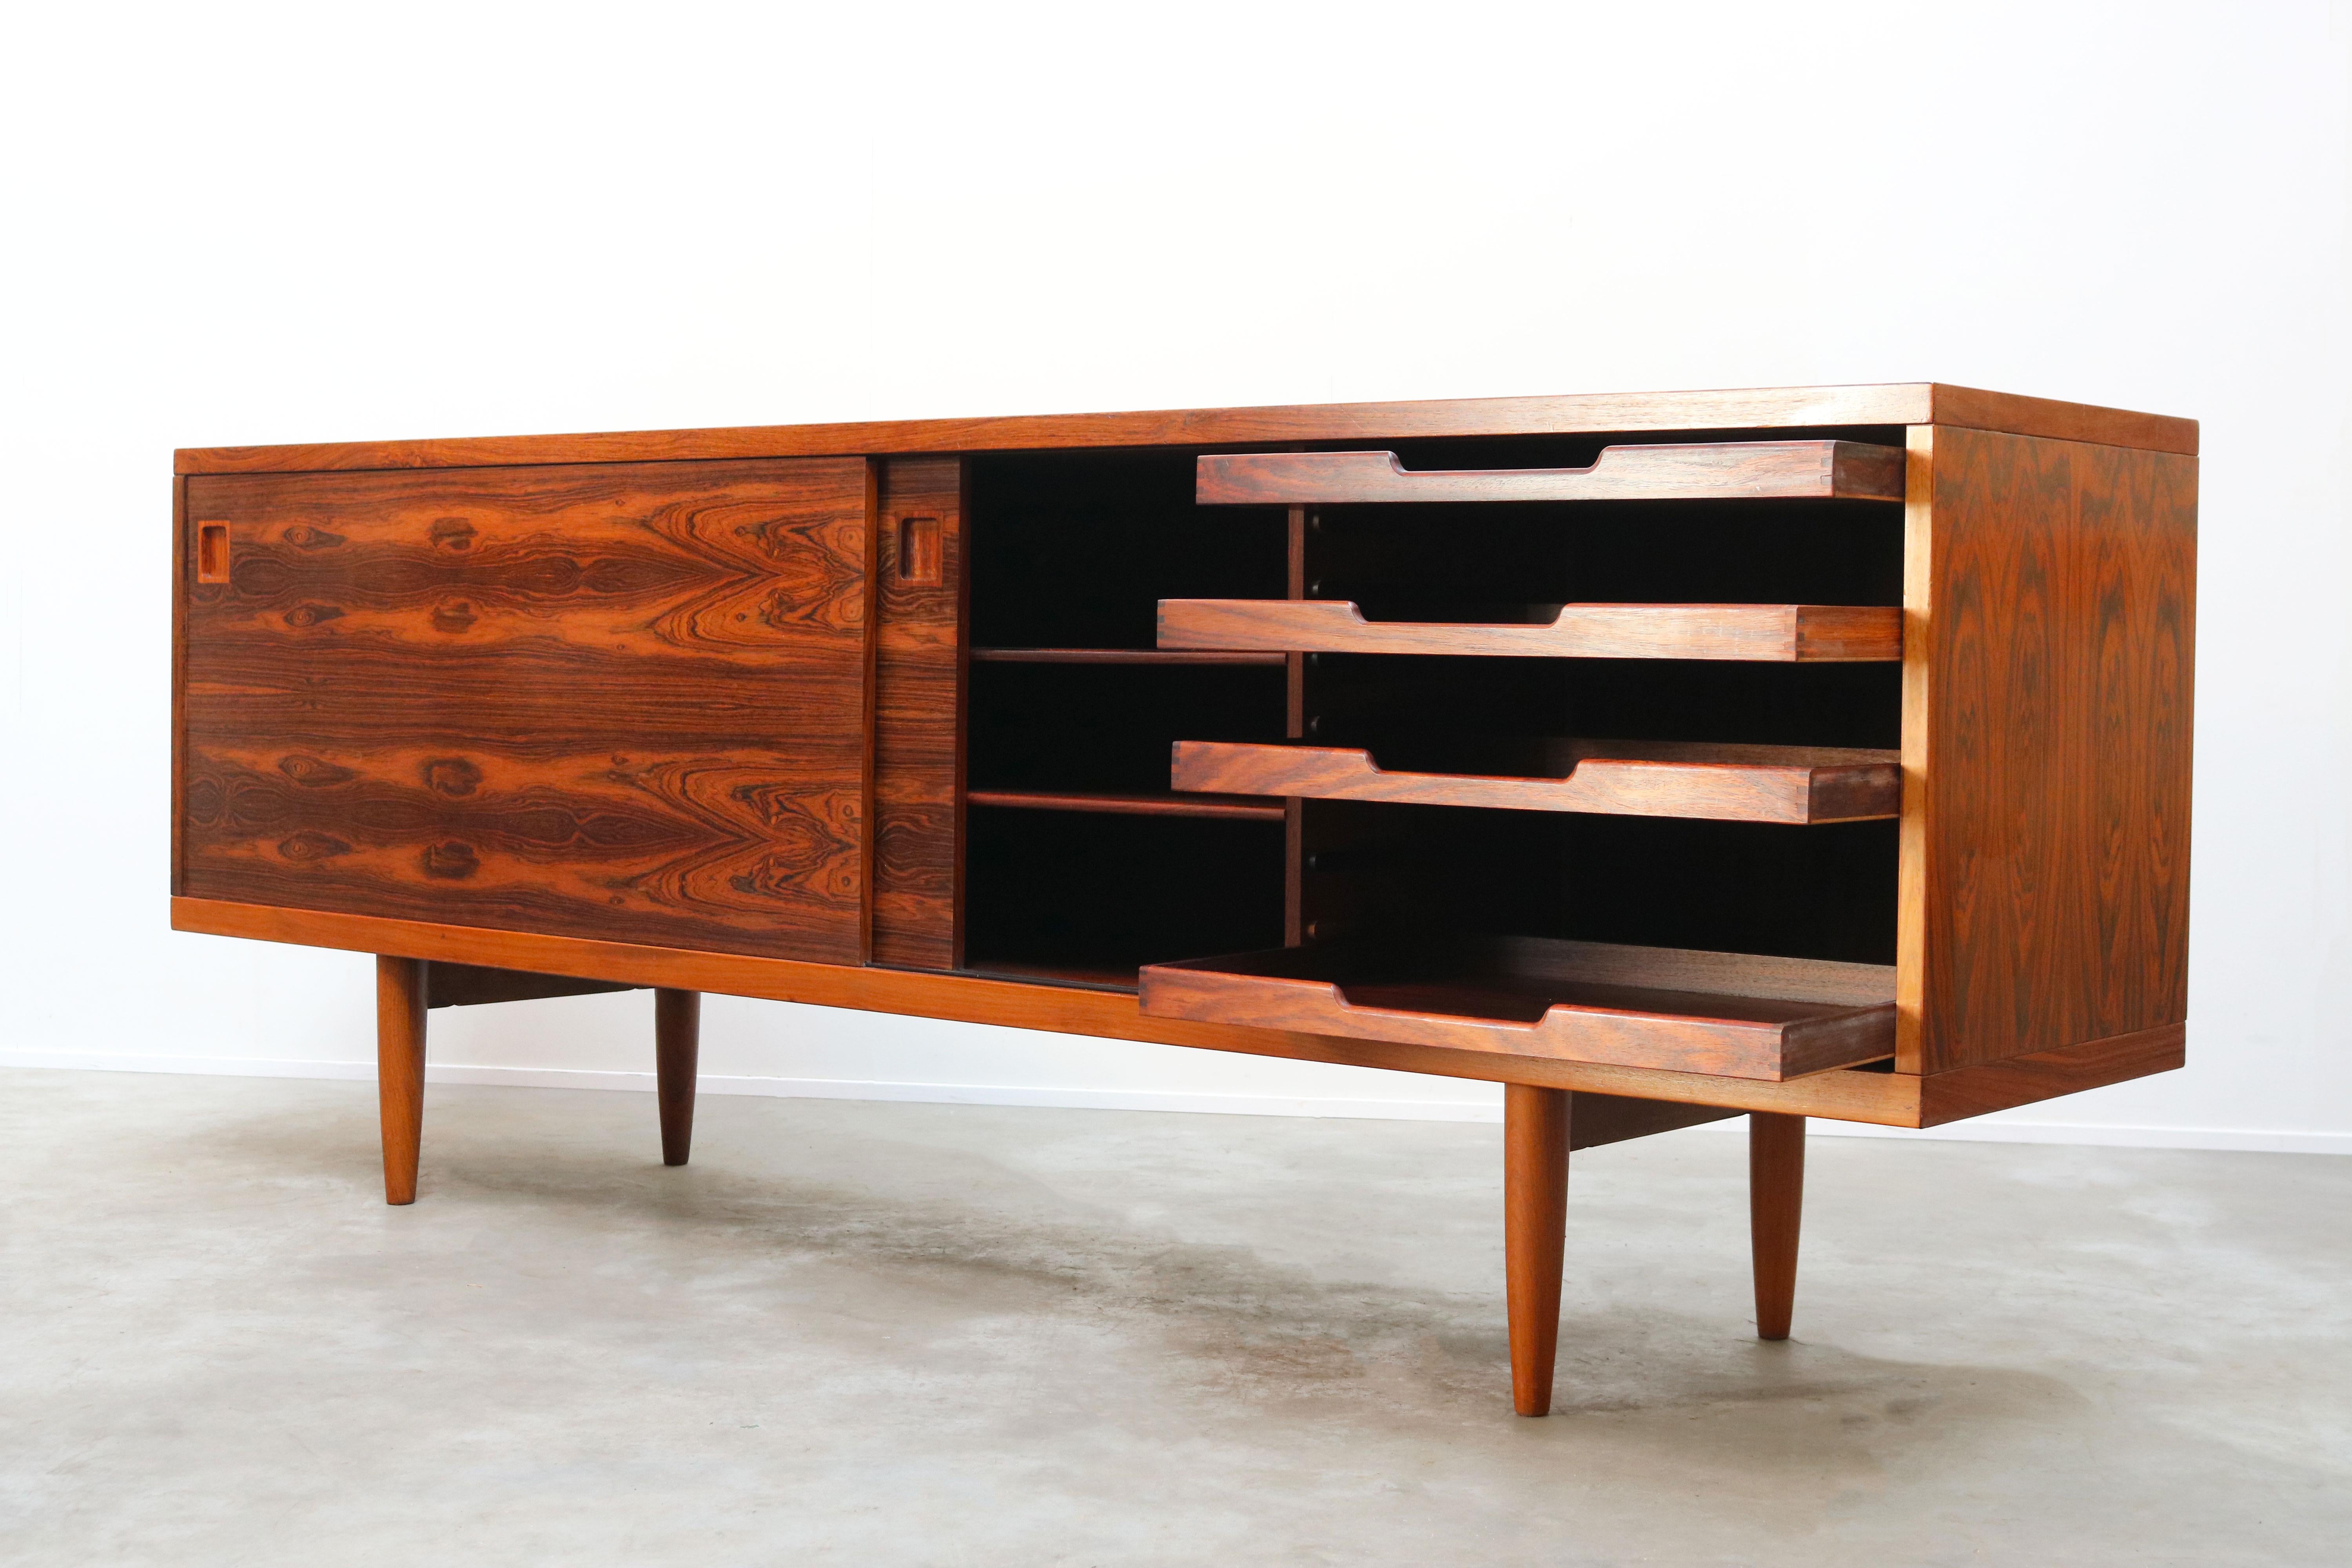 Rare Danish Credenza / Sideboard Model 20 by Niels Otto Moller 1950 Rosewood For Sale 5